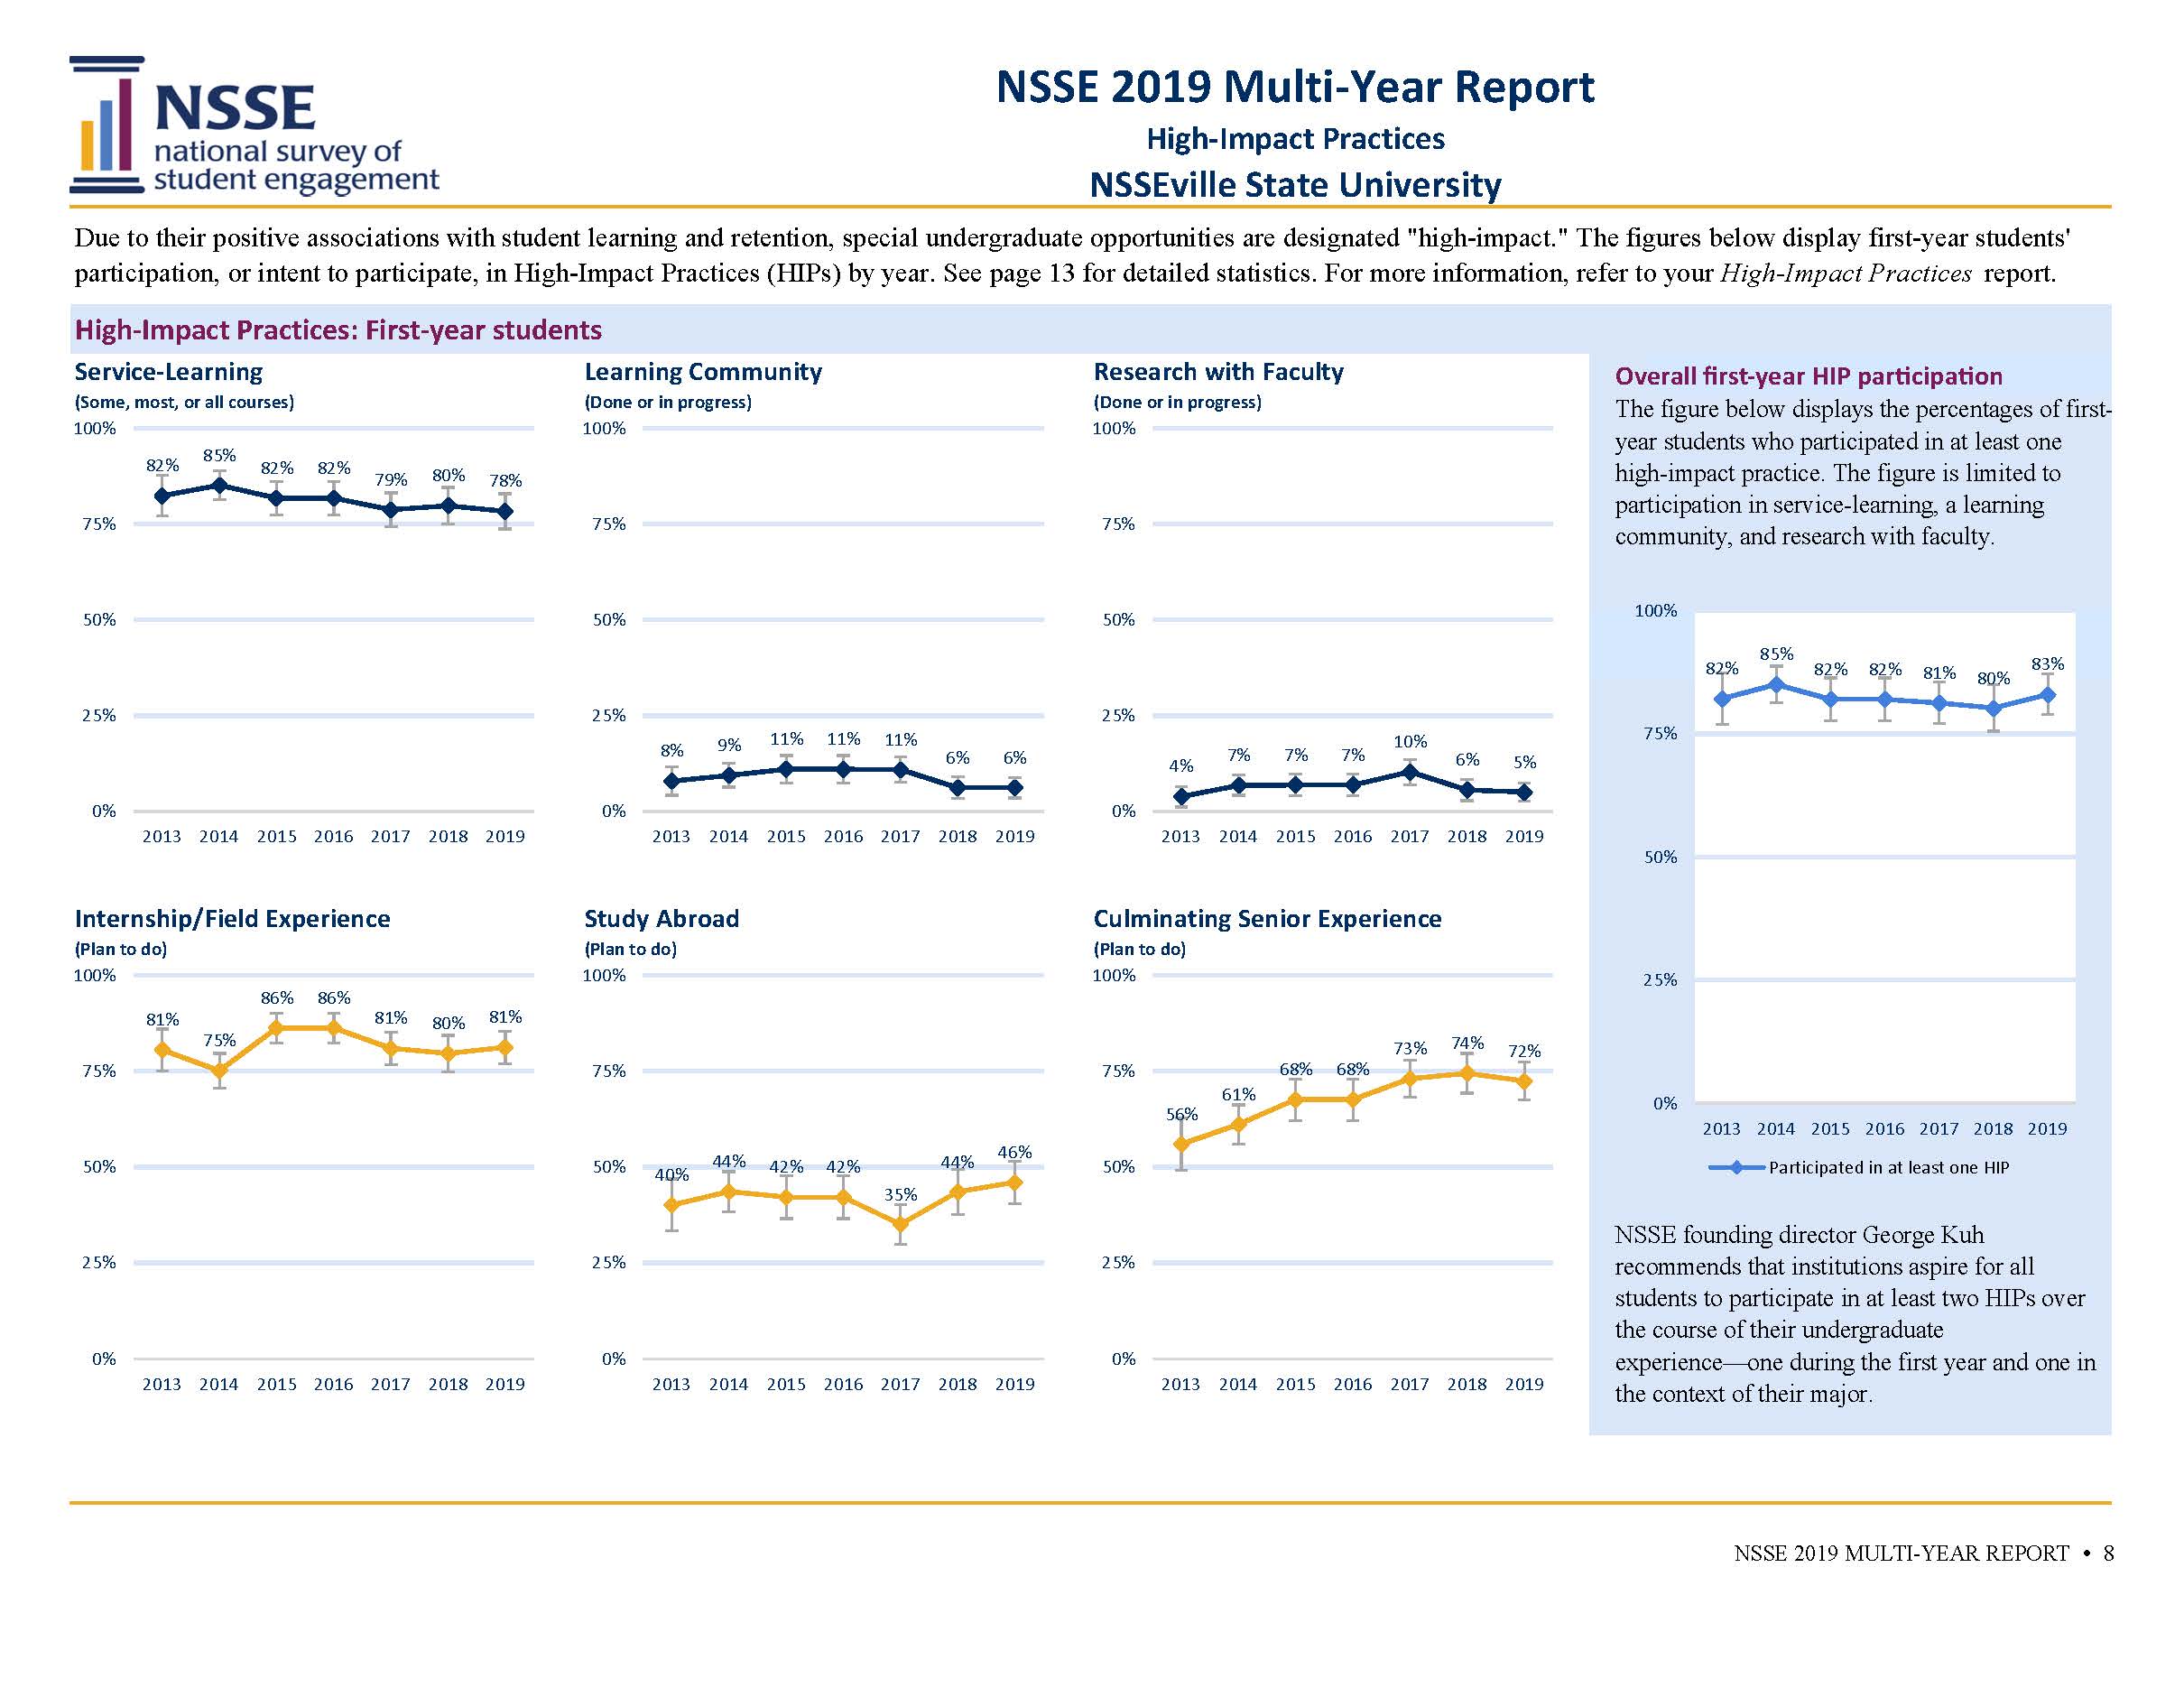 Sample Report: page 4 of NSSE Multi-Year Report